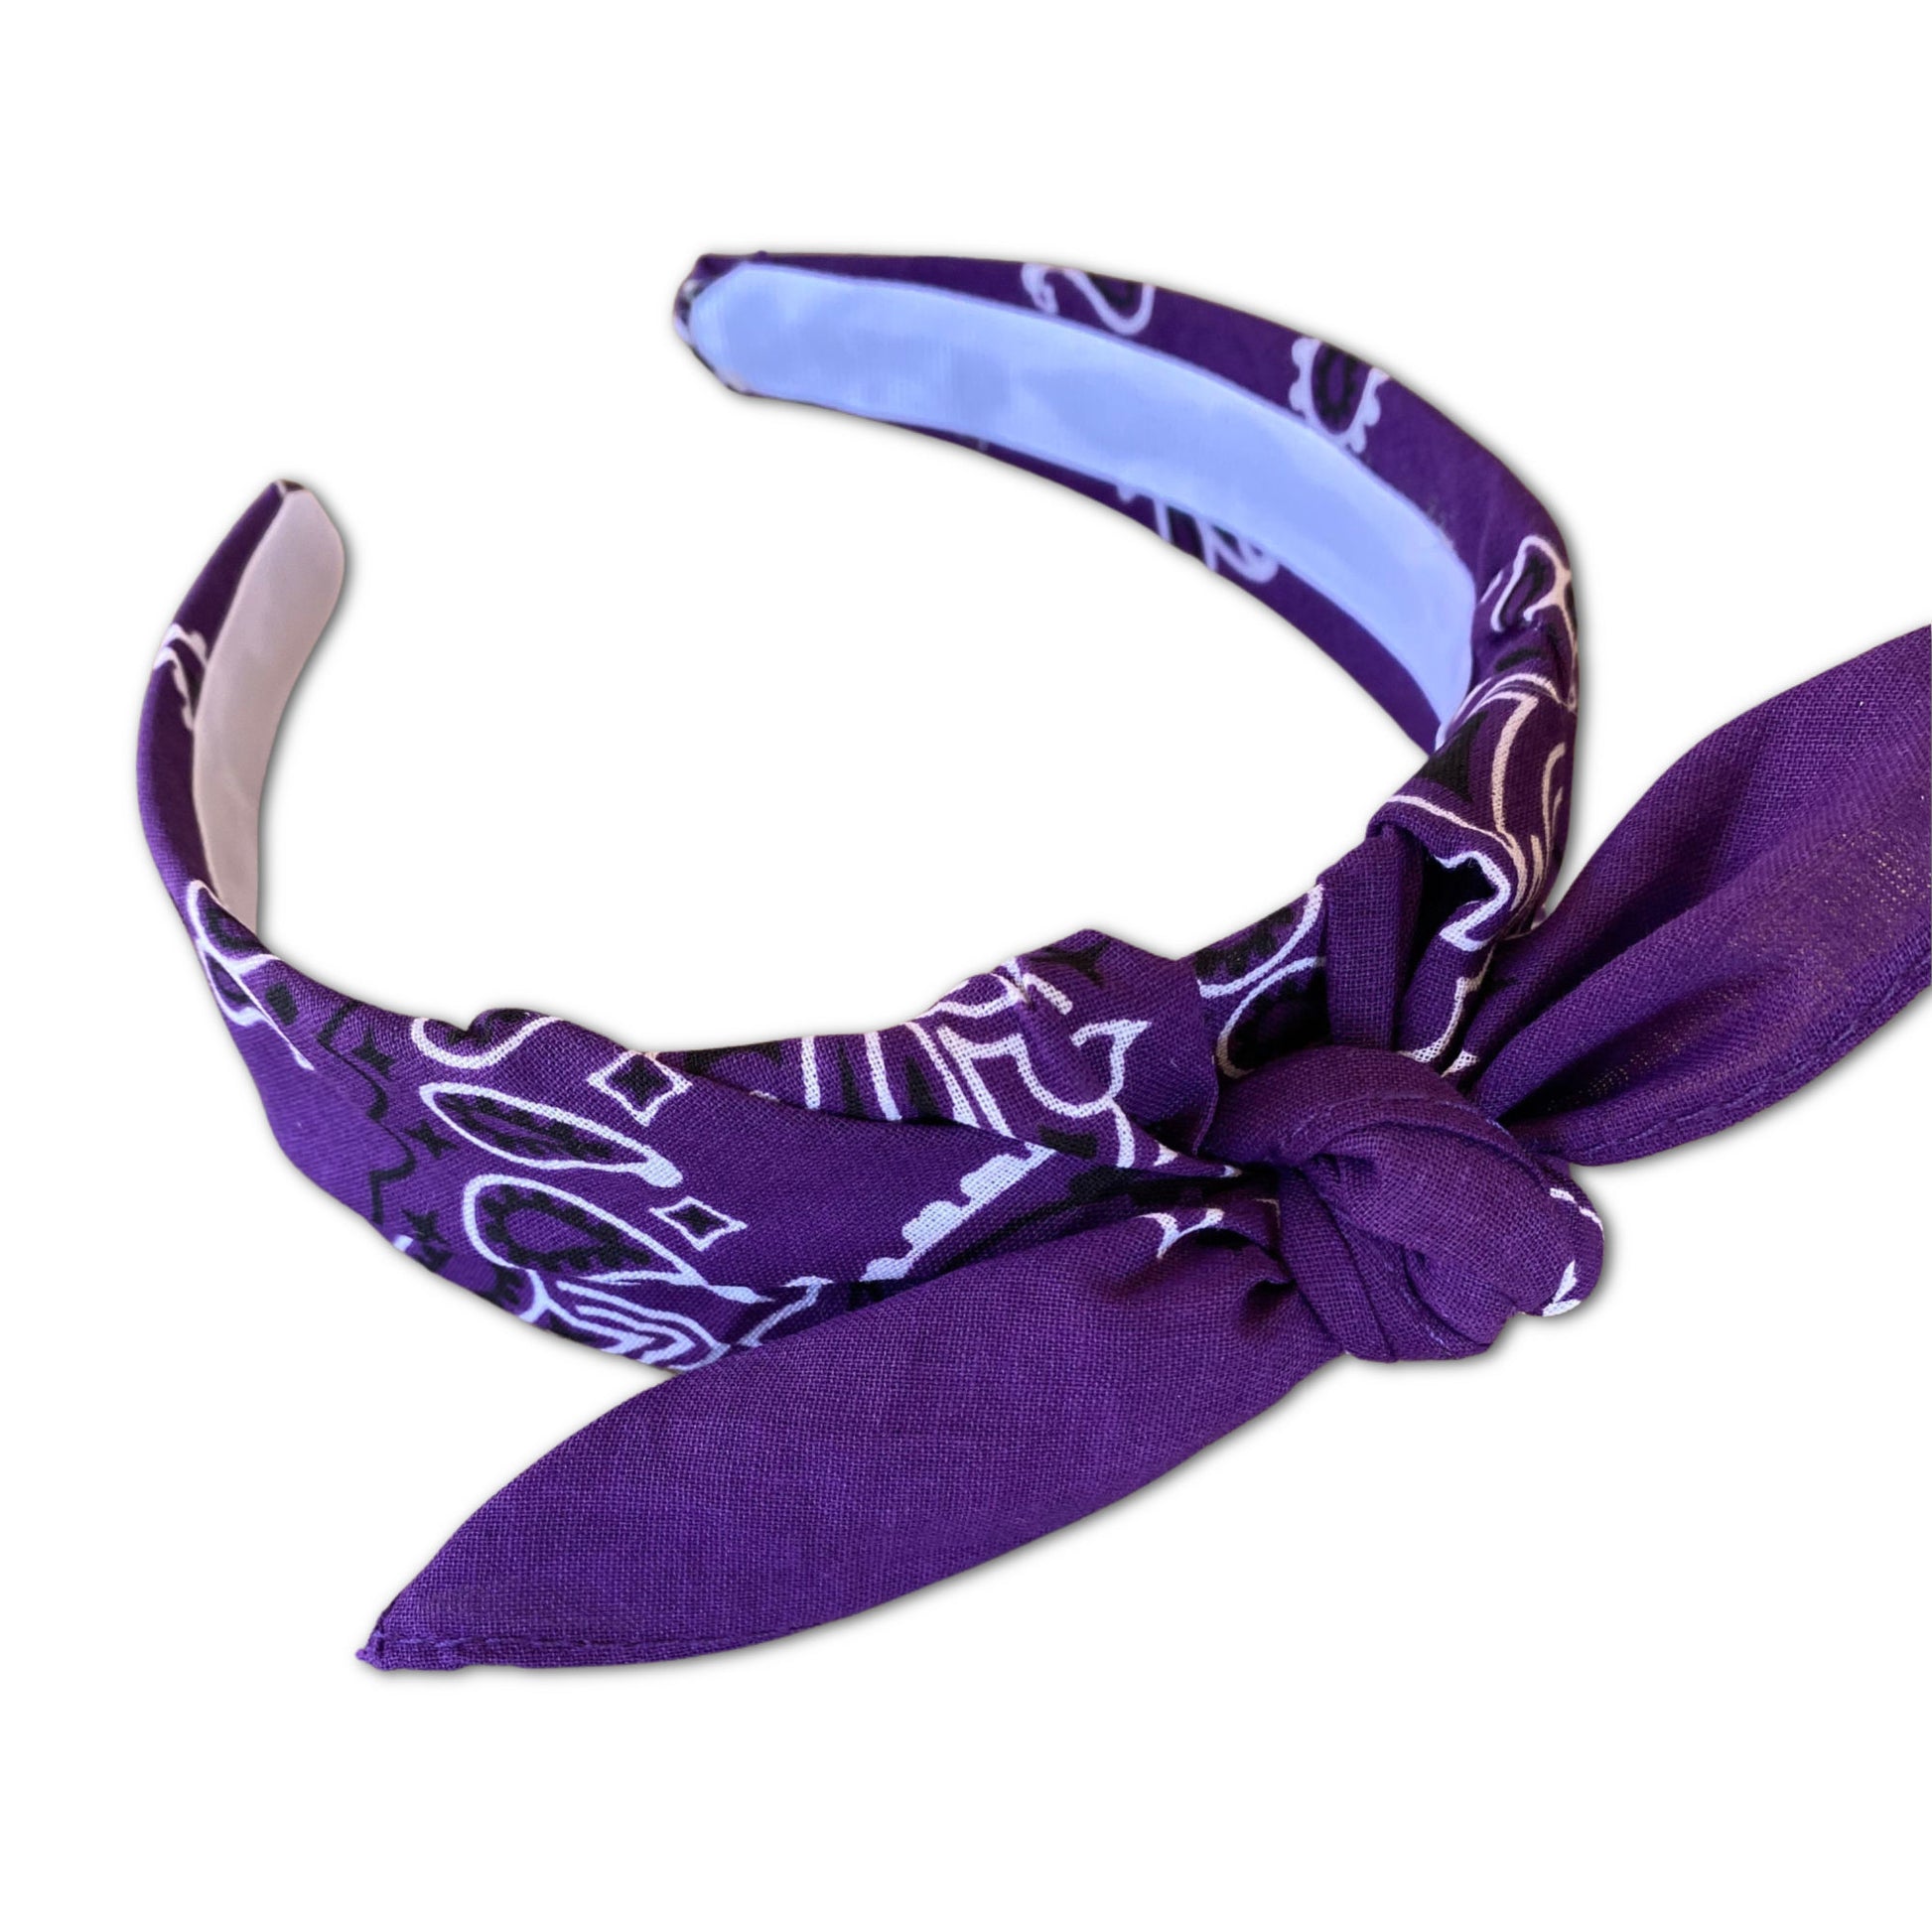 Purple paisley kerchief bandana is wrapped around a plastic headband and tied in a knot. Hairband is designed to not slip